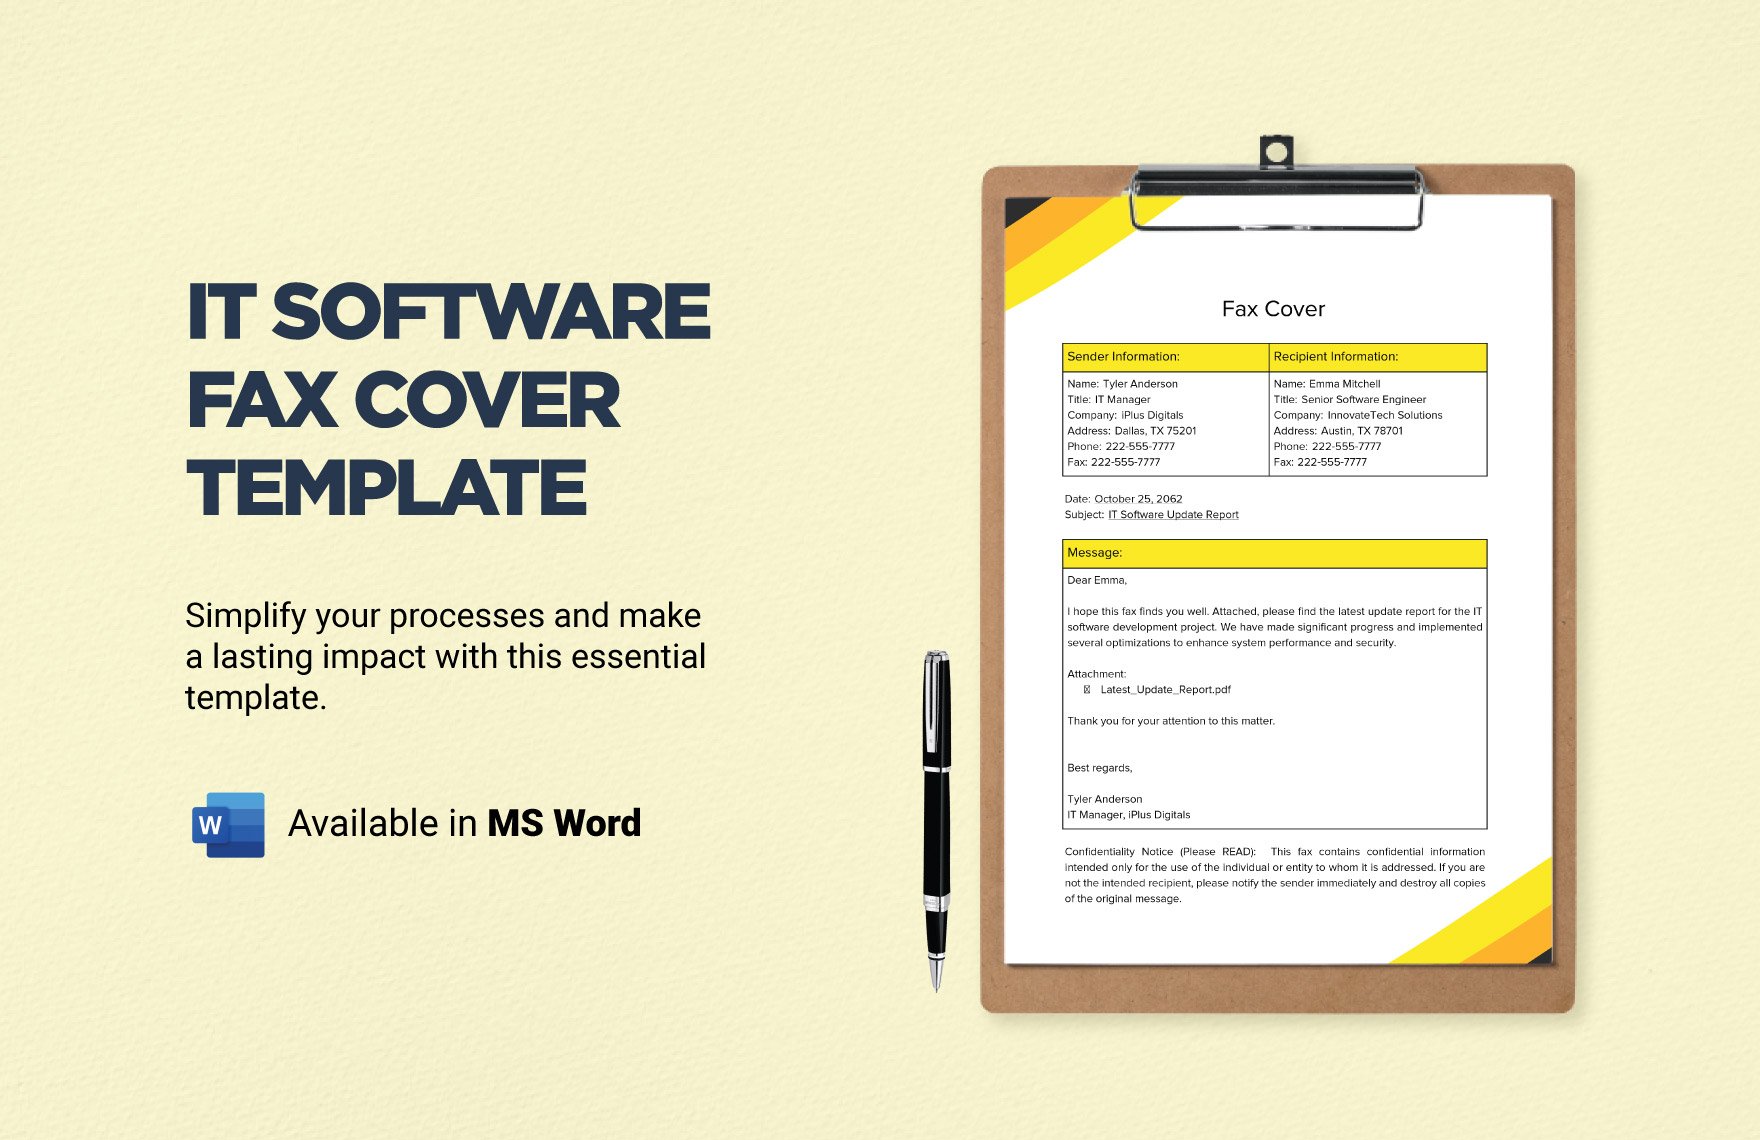 IT Software Fax Cover Template